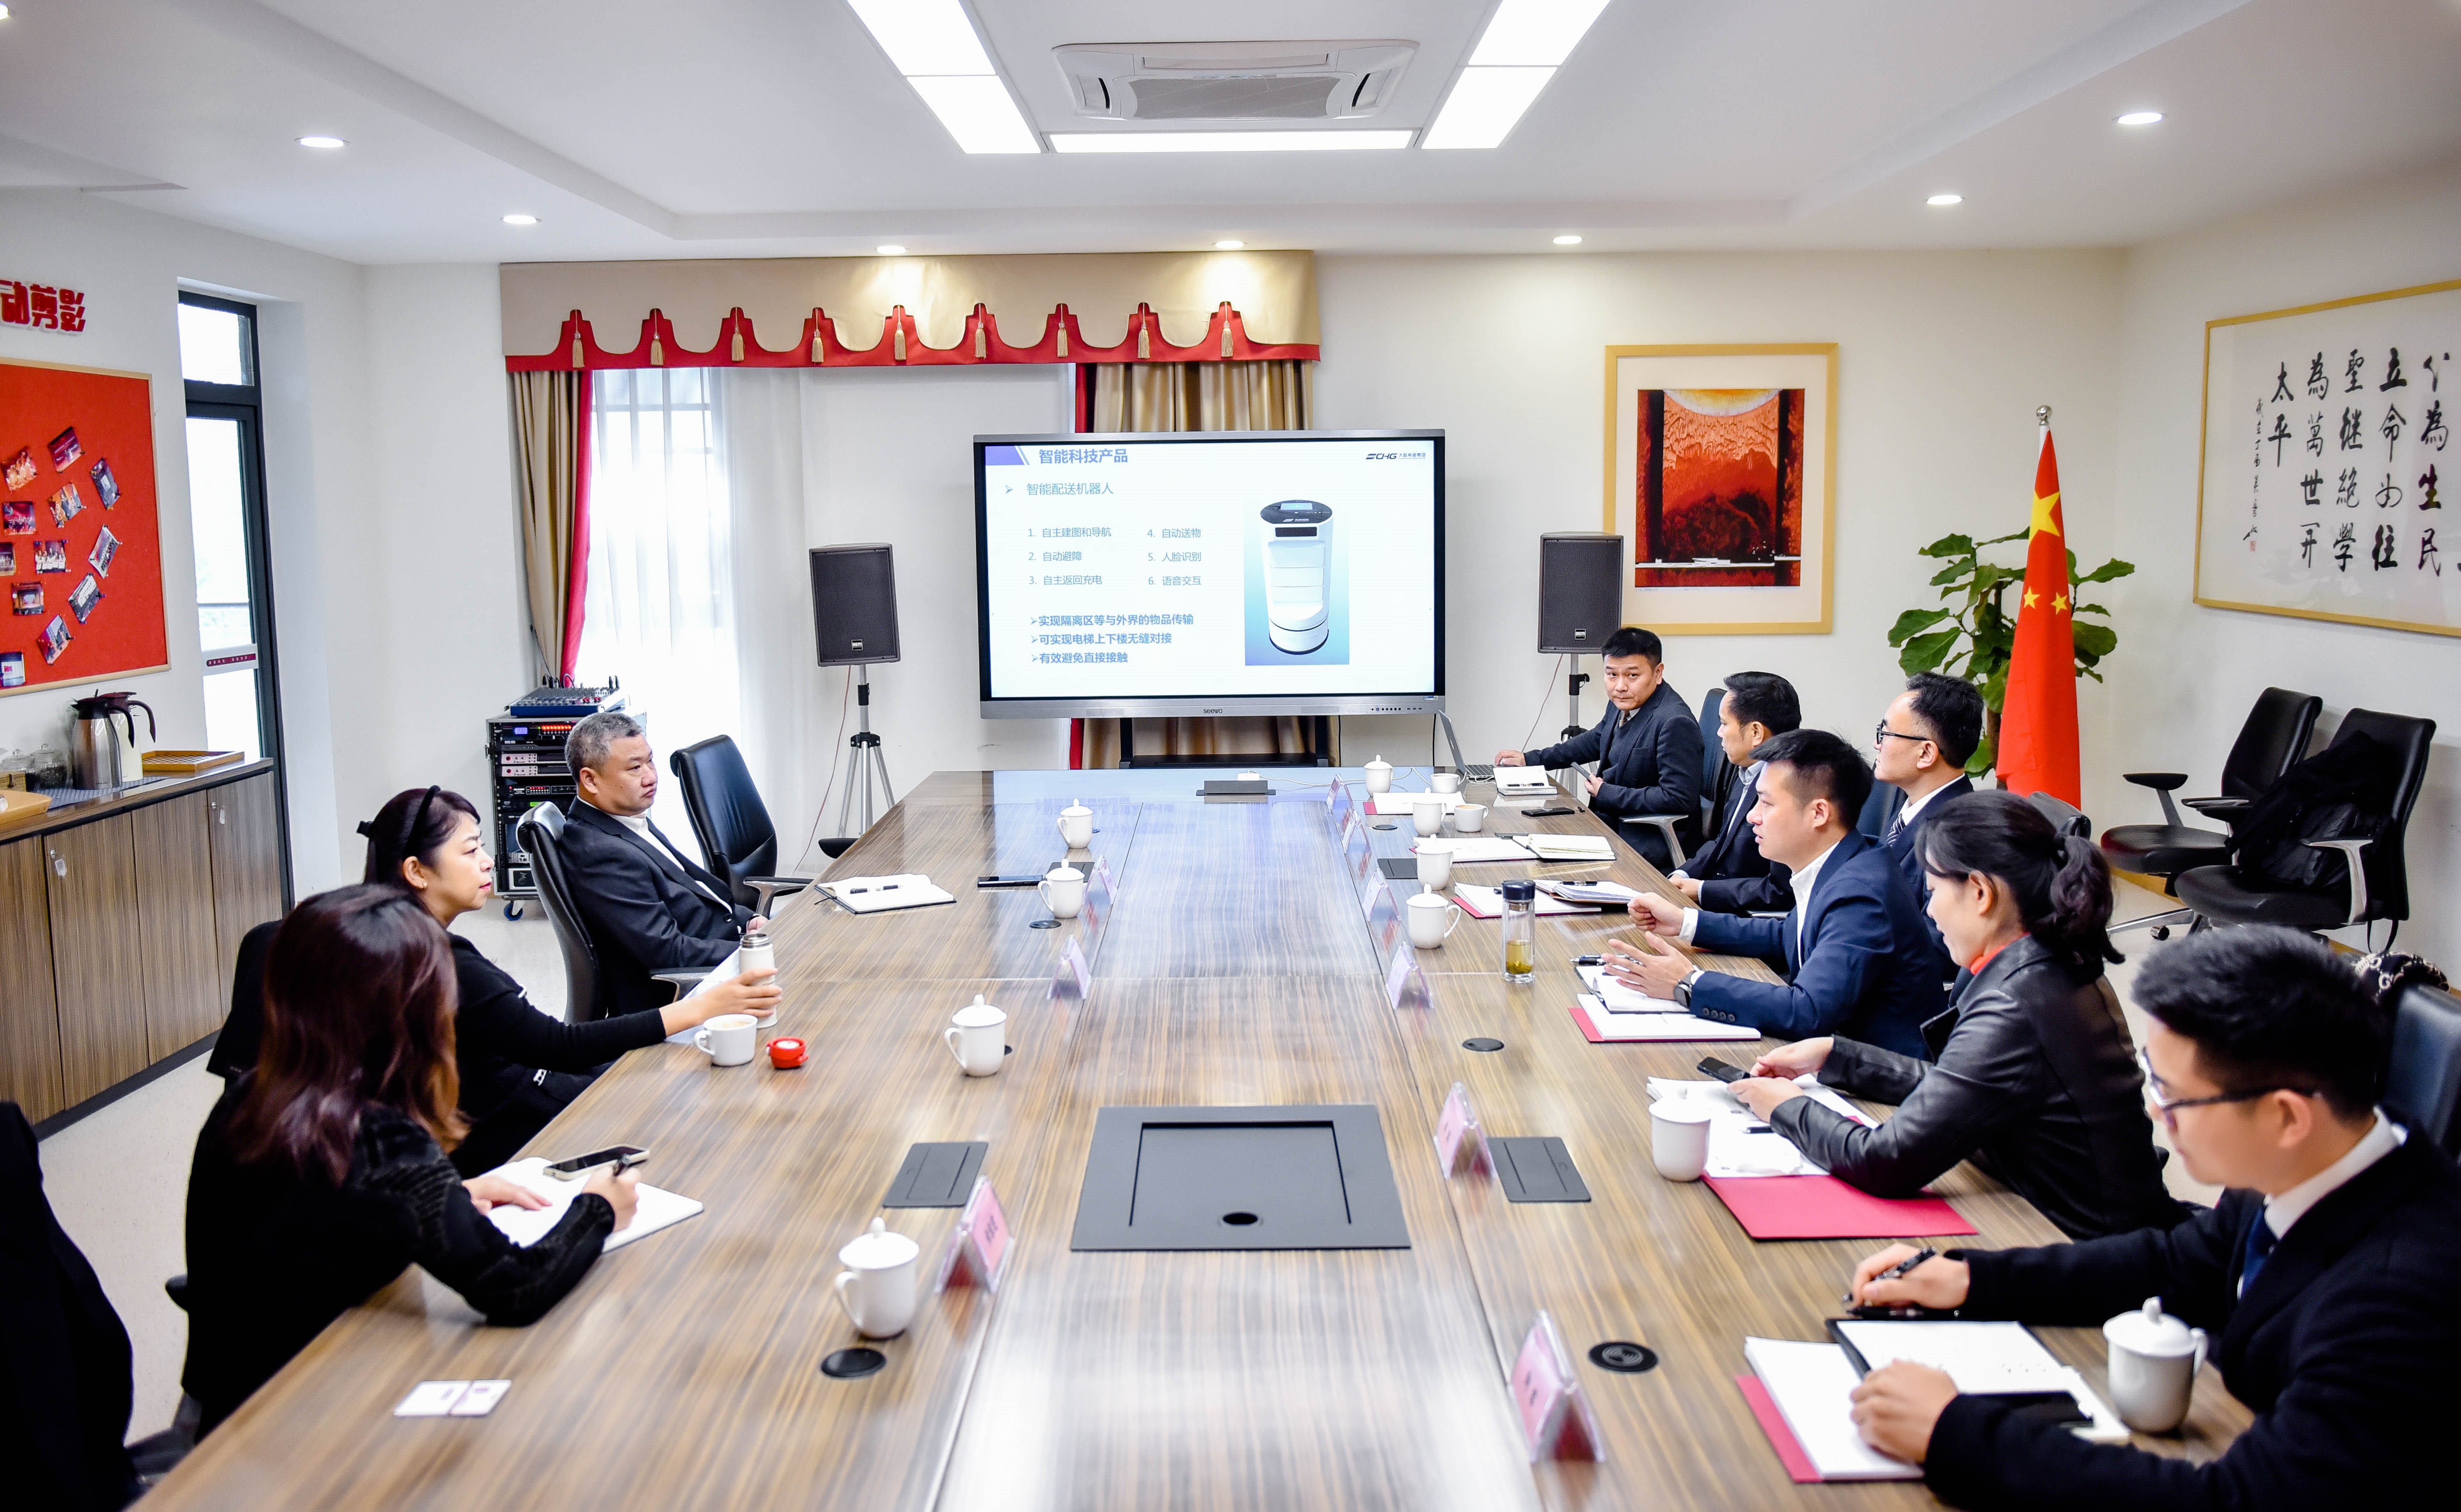 GROUP VICE PRESIDENT DR. CHENG YIFENG LED A TEAM TO VISIT GOLDEN APPLE EDUCATION INVESTMENT (GROUP) CO., LTD. AND CHINA MOBILE CHENGDU BRANCH